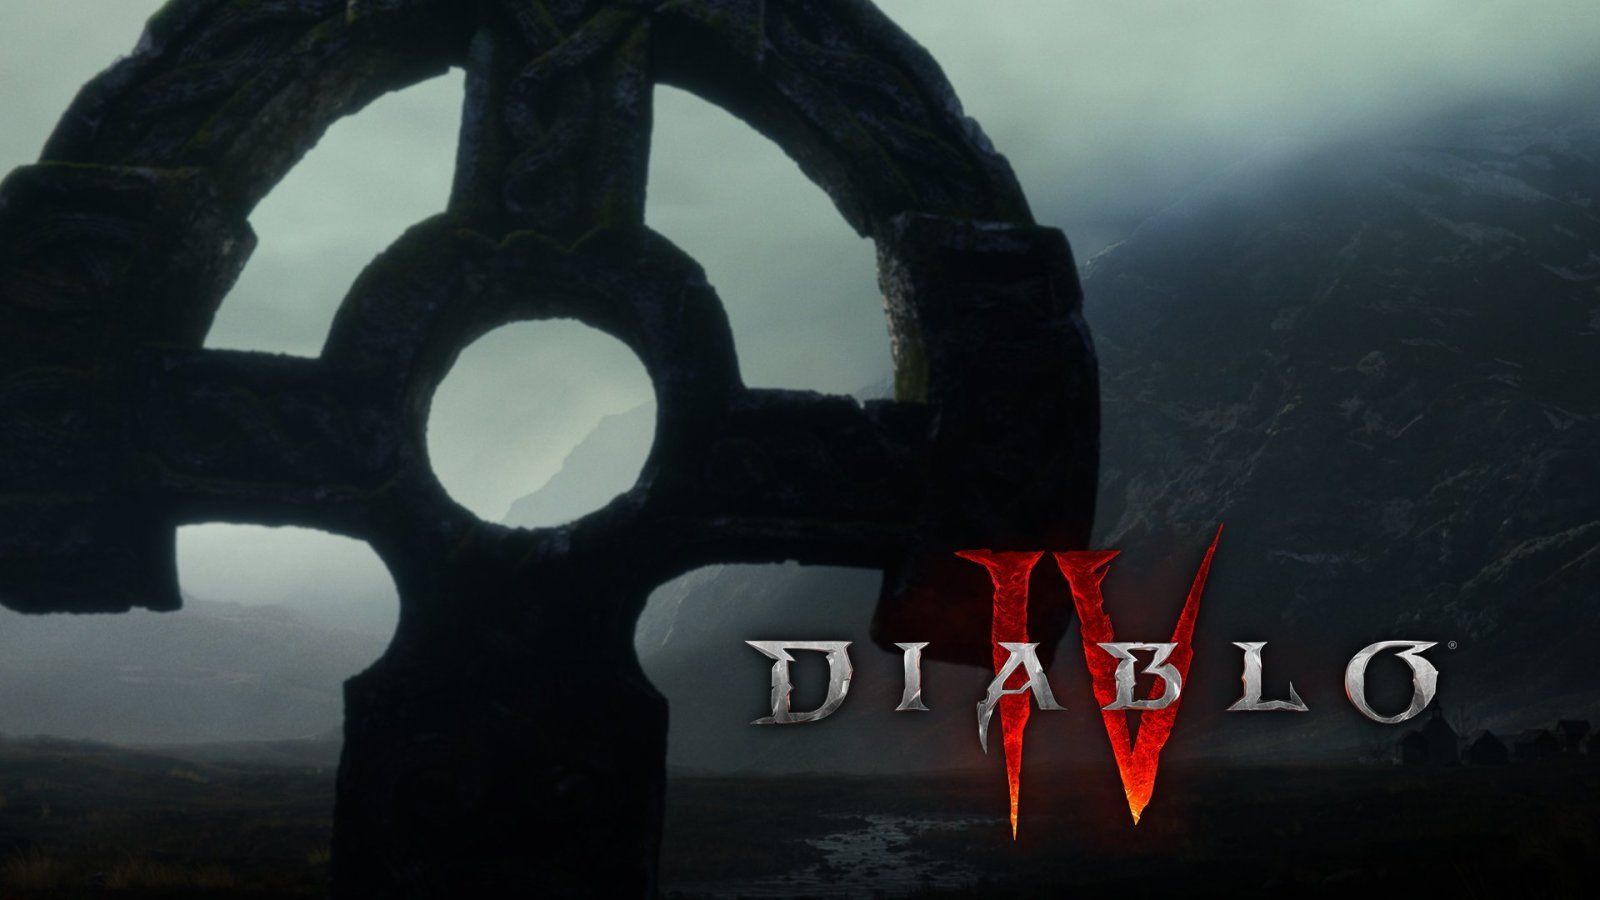 Diablo IV announced have we learned